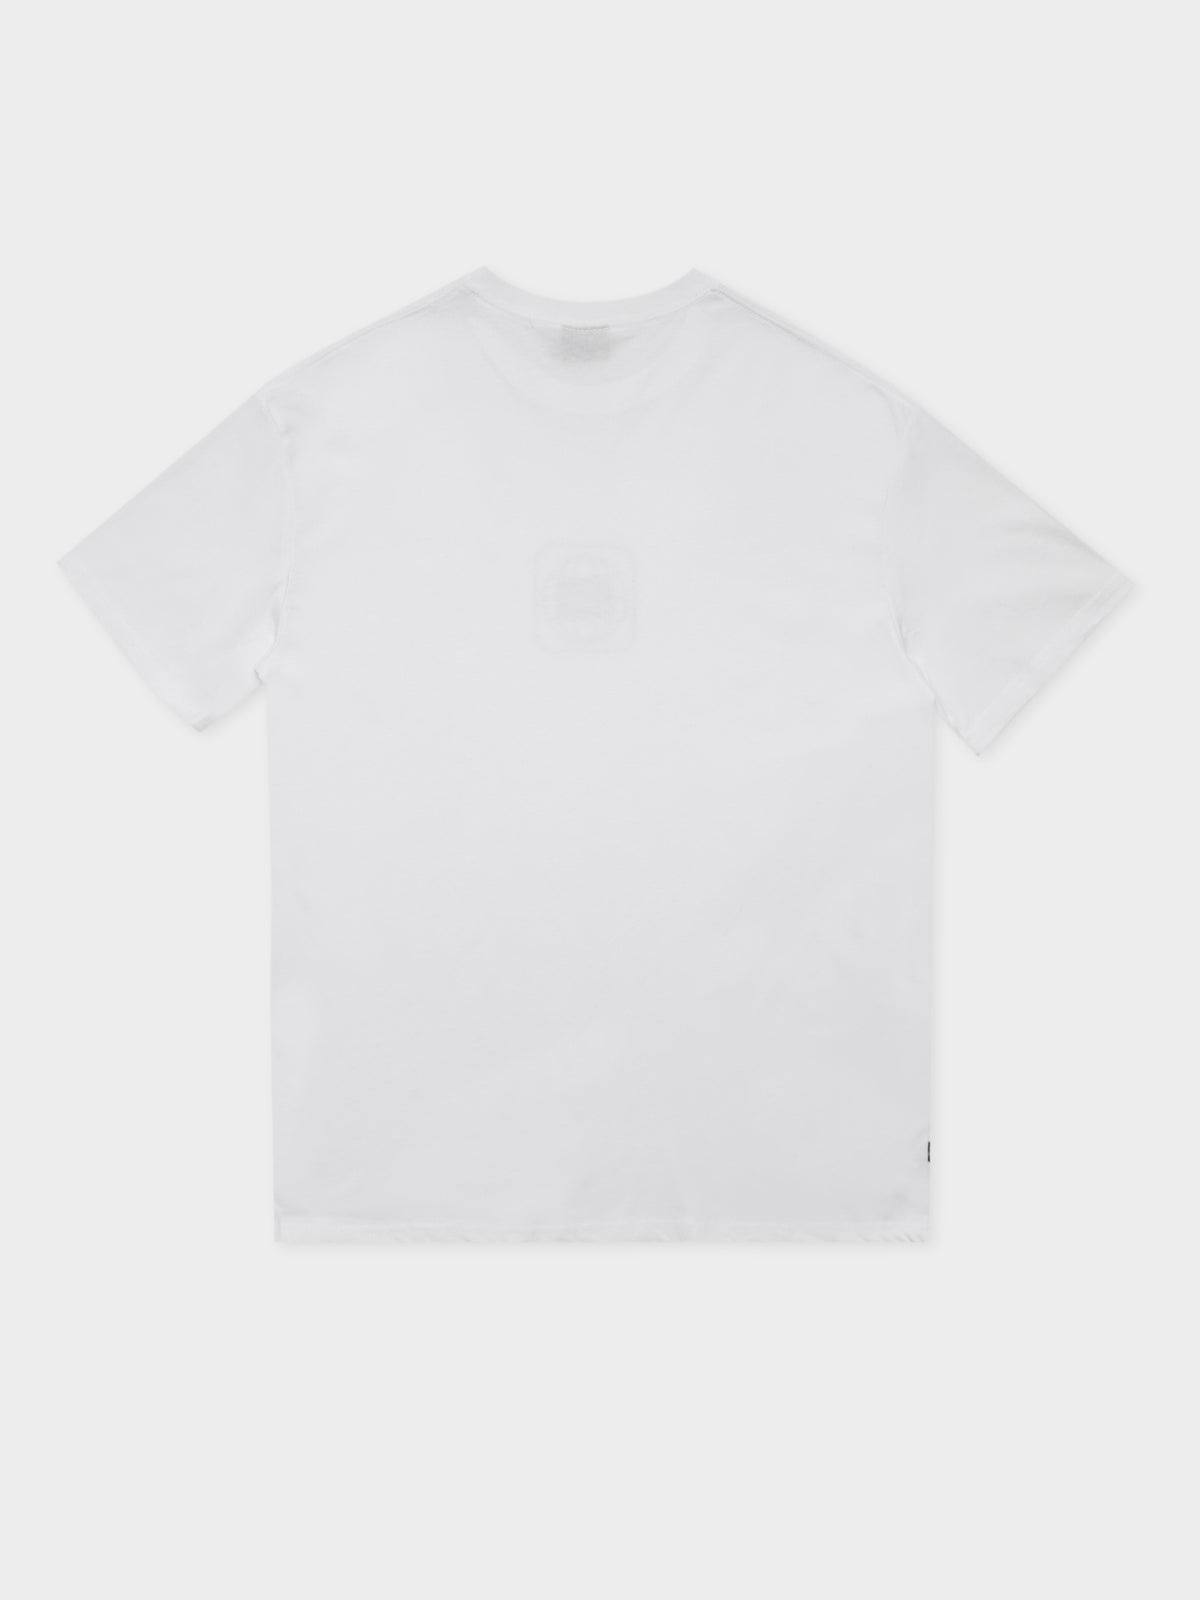 Universe T-Shirt in White